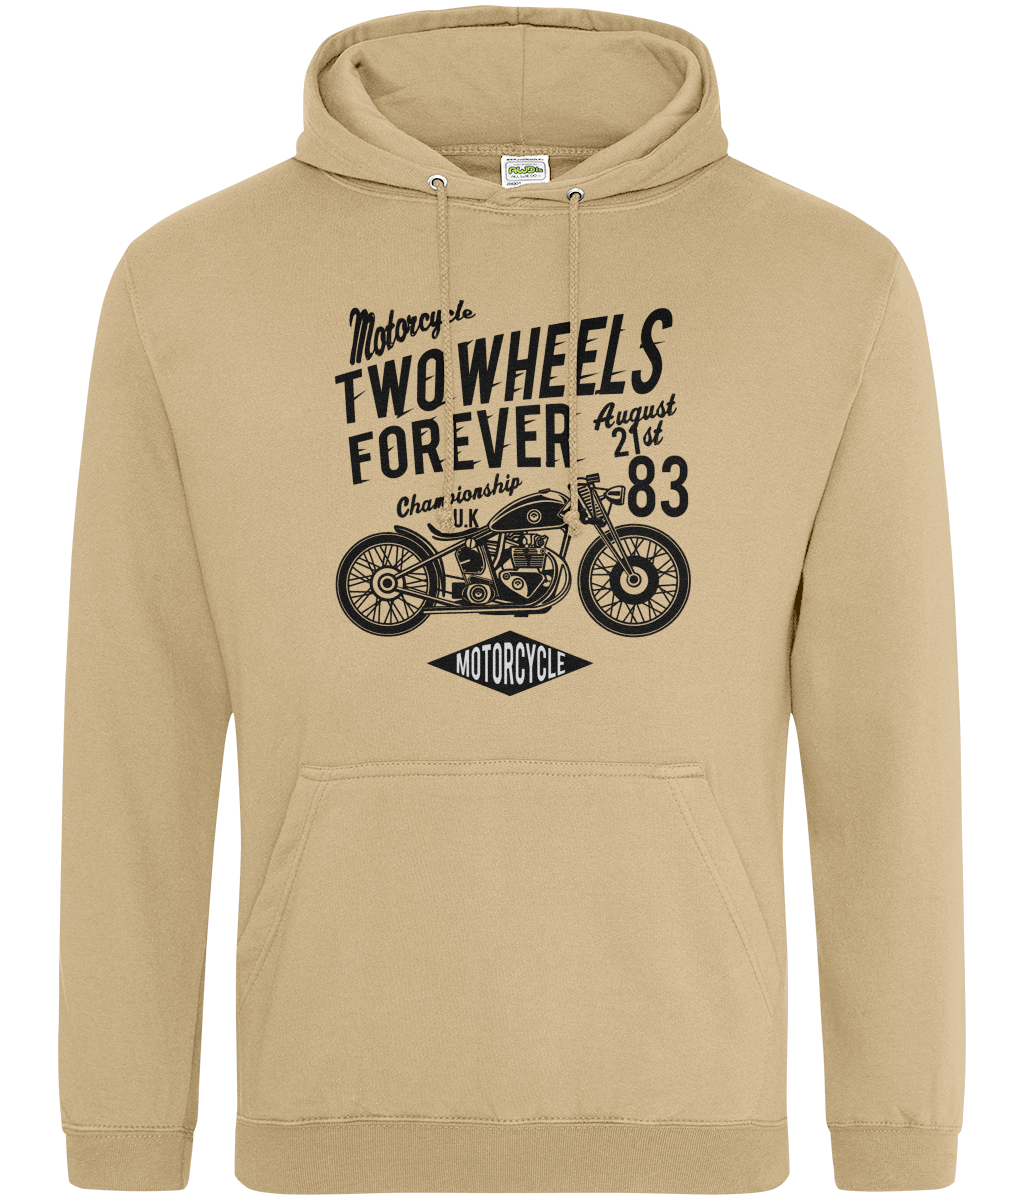 Two Wheels Forever Black – Awdis College Hoodie